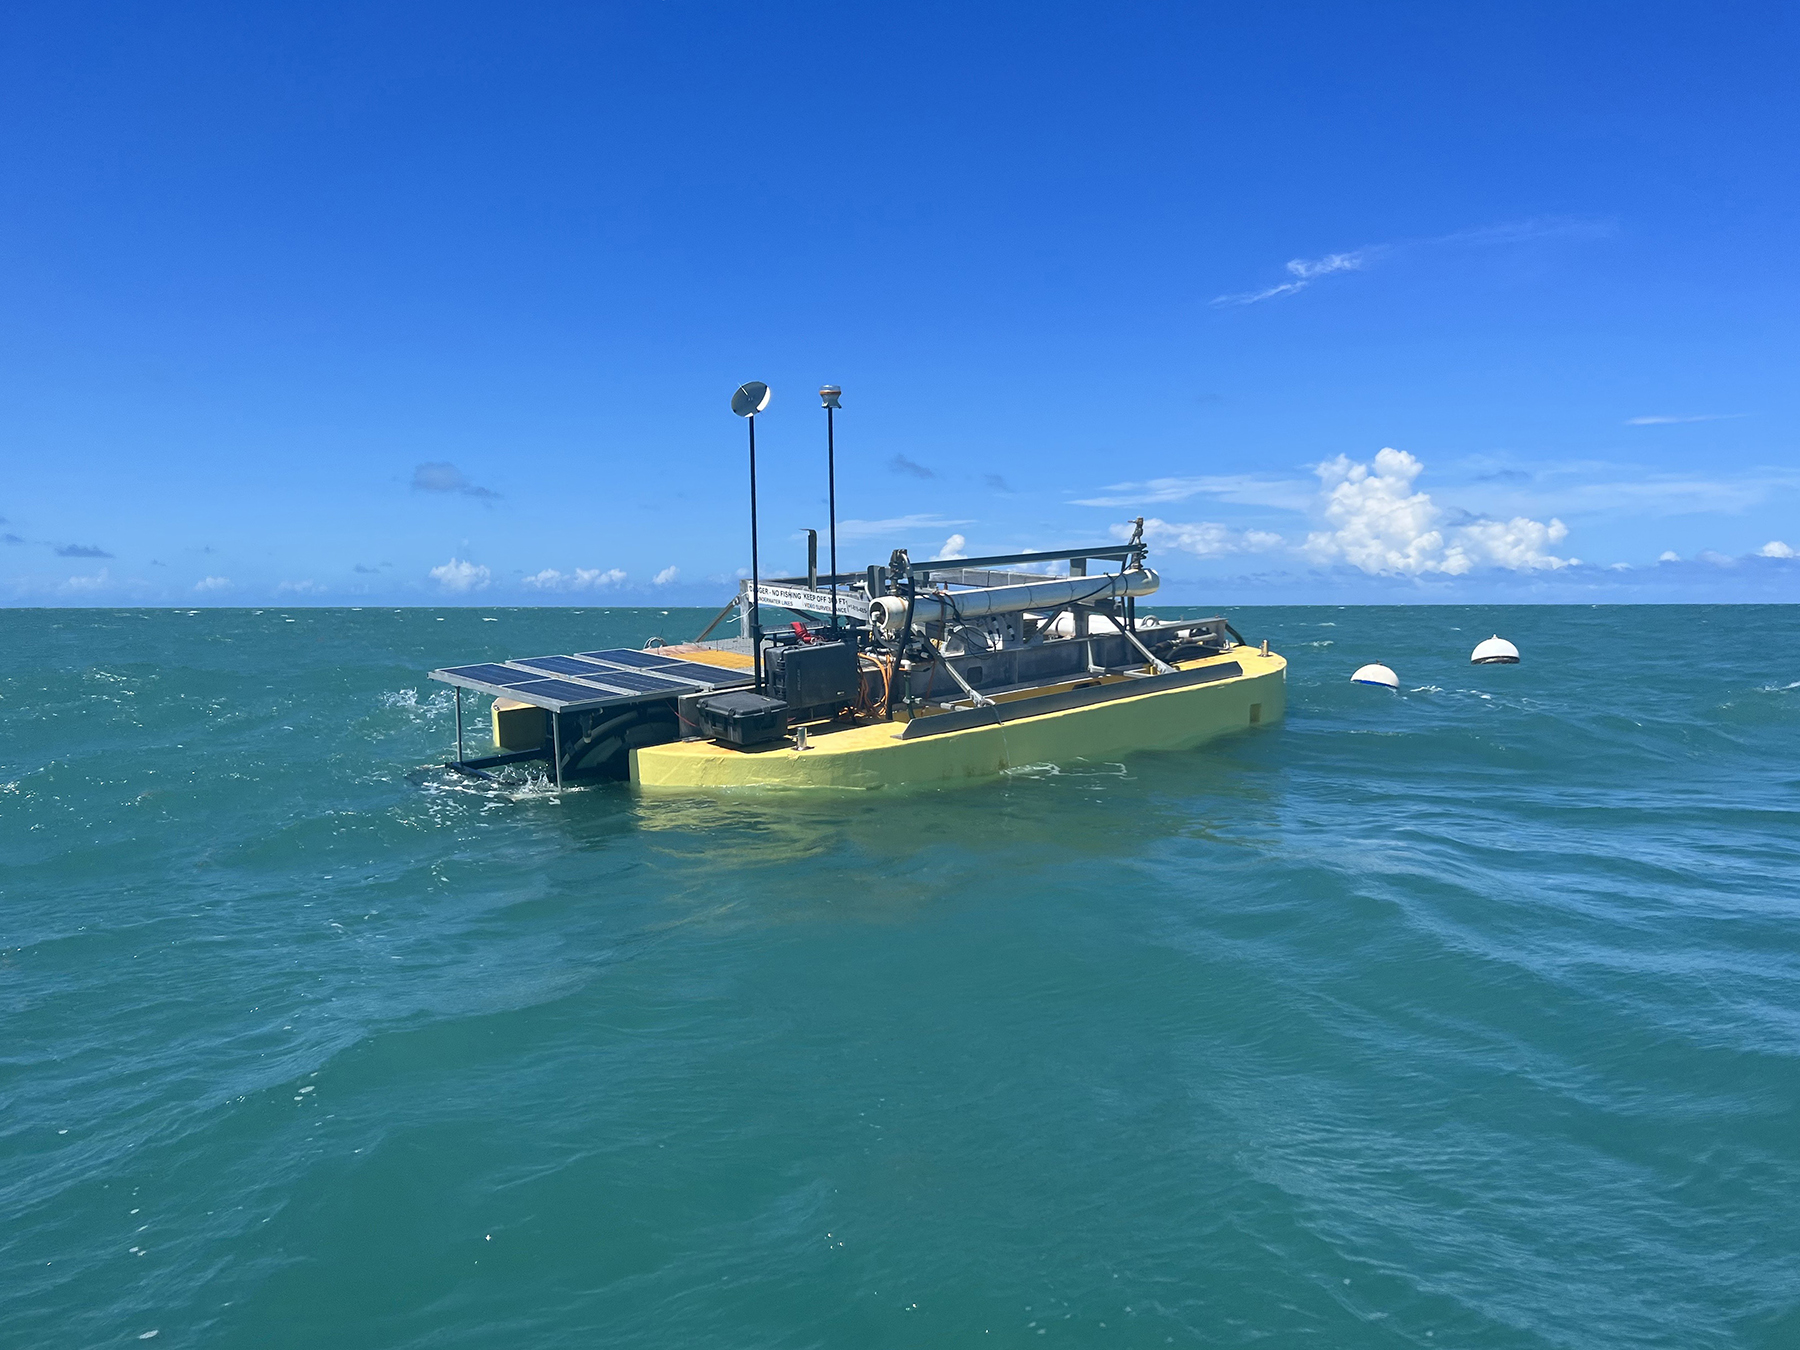 Oneka Technologies plans to test its wave-powered desalination buoy off the coast of Fort Bragg, California, in 2024. (Image courtesy of Jesus Rivero/Oneka Technologies)